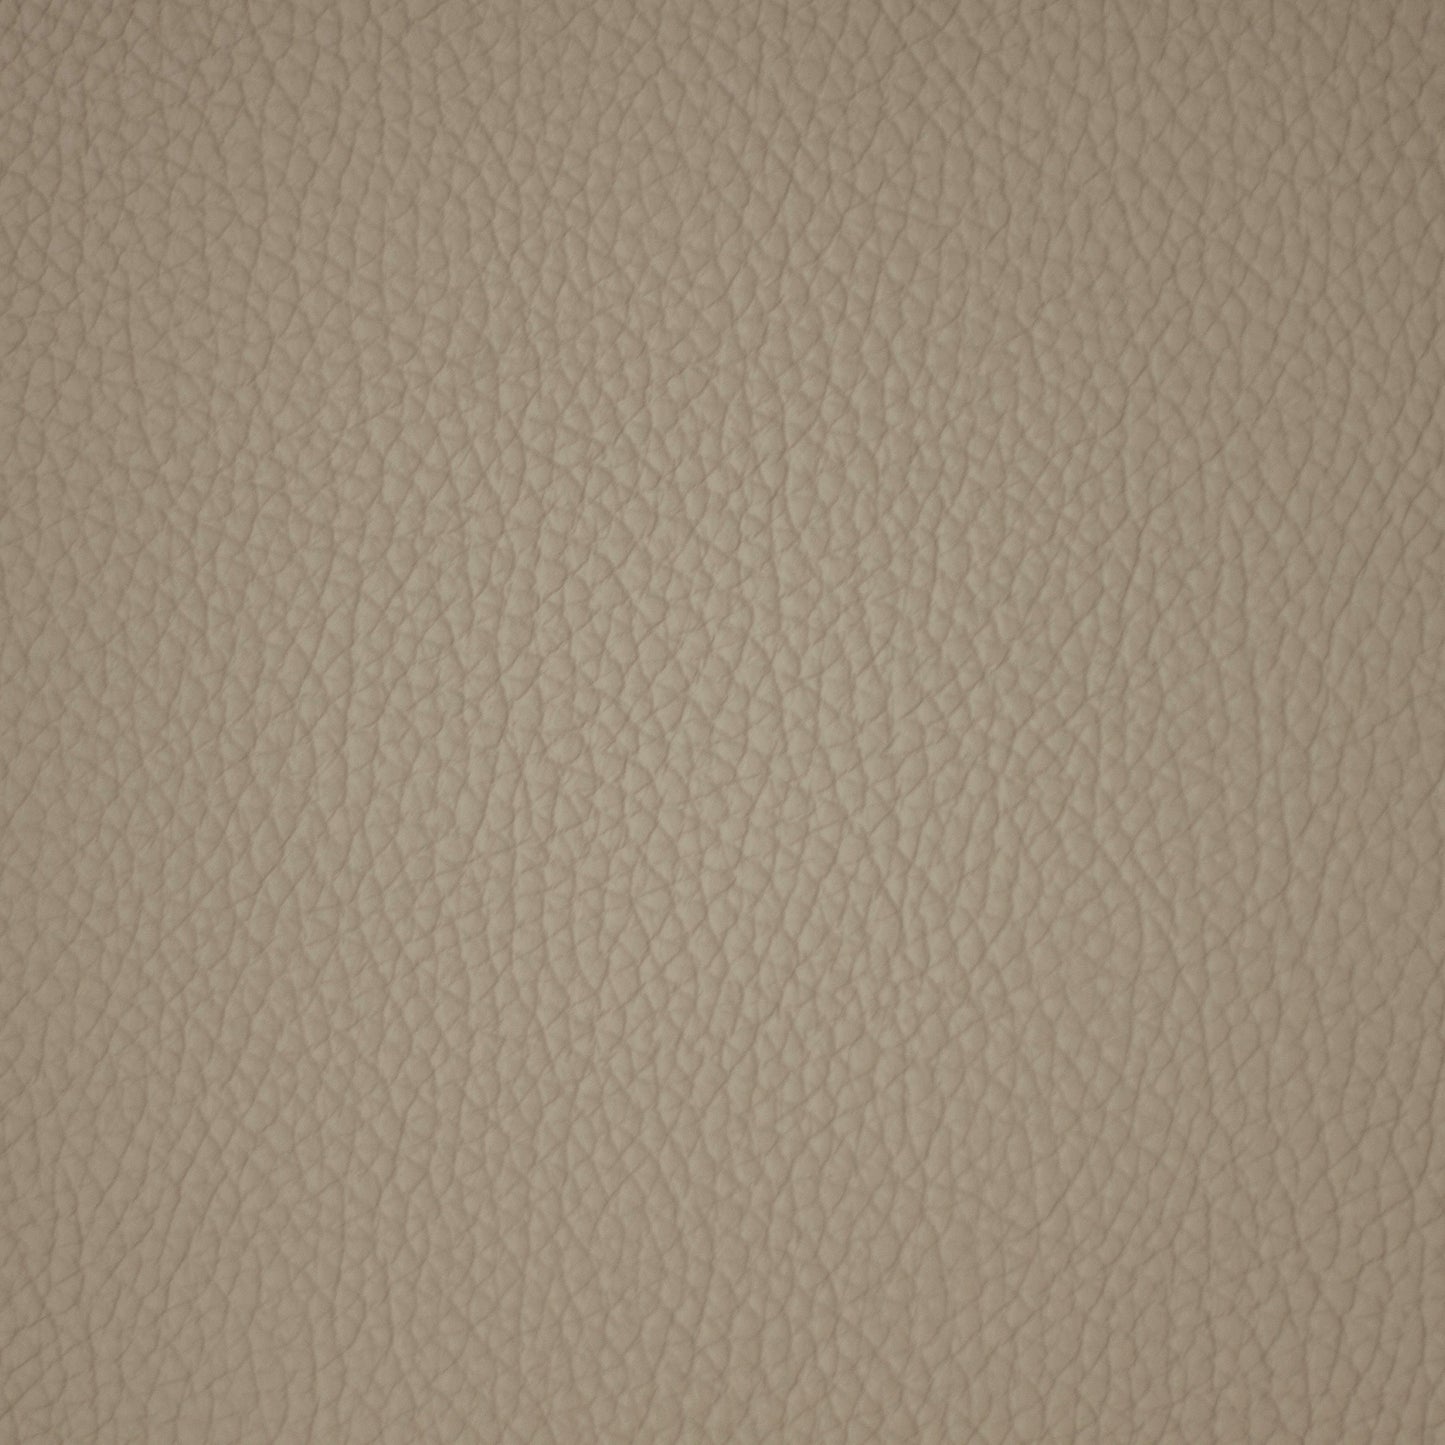 Mystique, Milkglass, Iconic® Antimicrobial & Cleanable, Hospitality Leather Hide